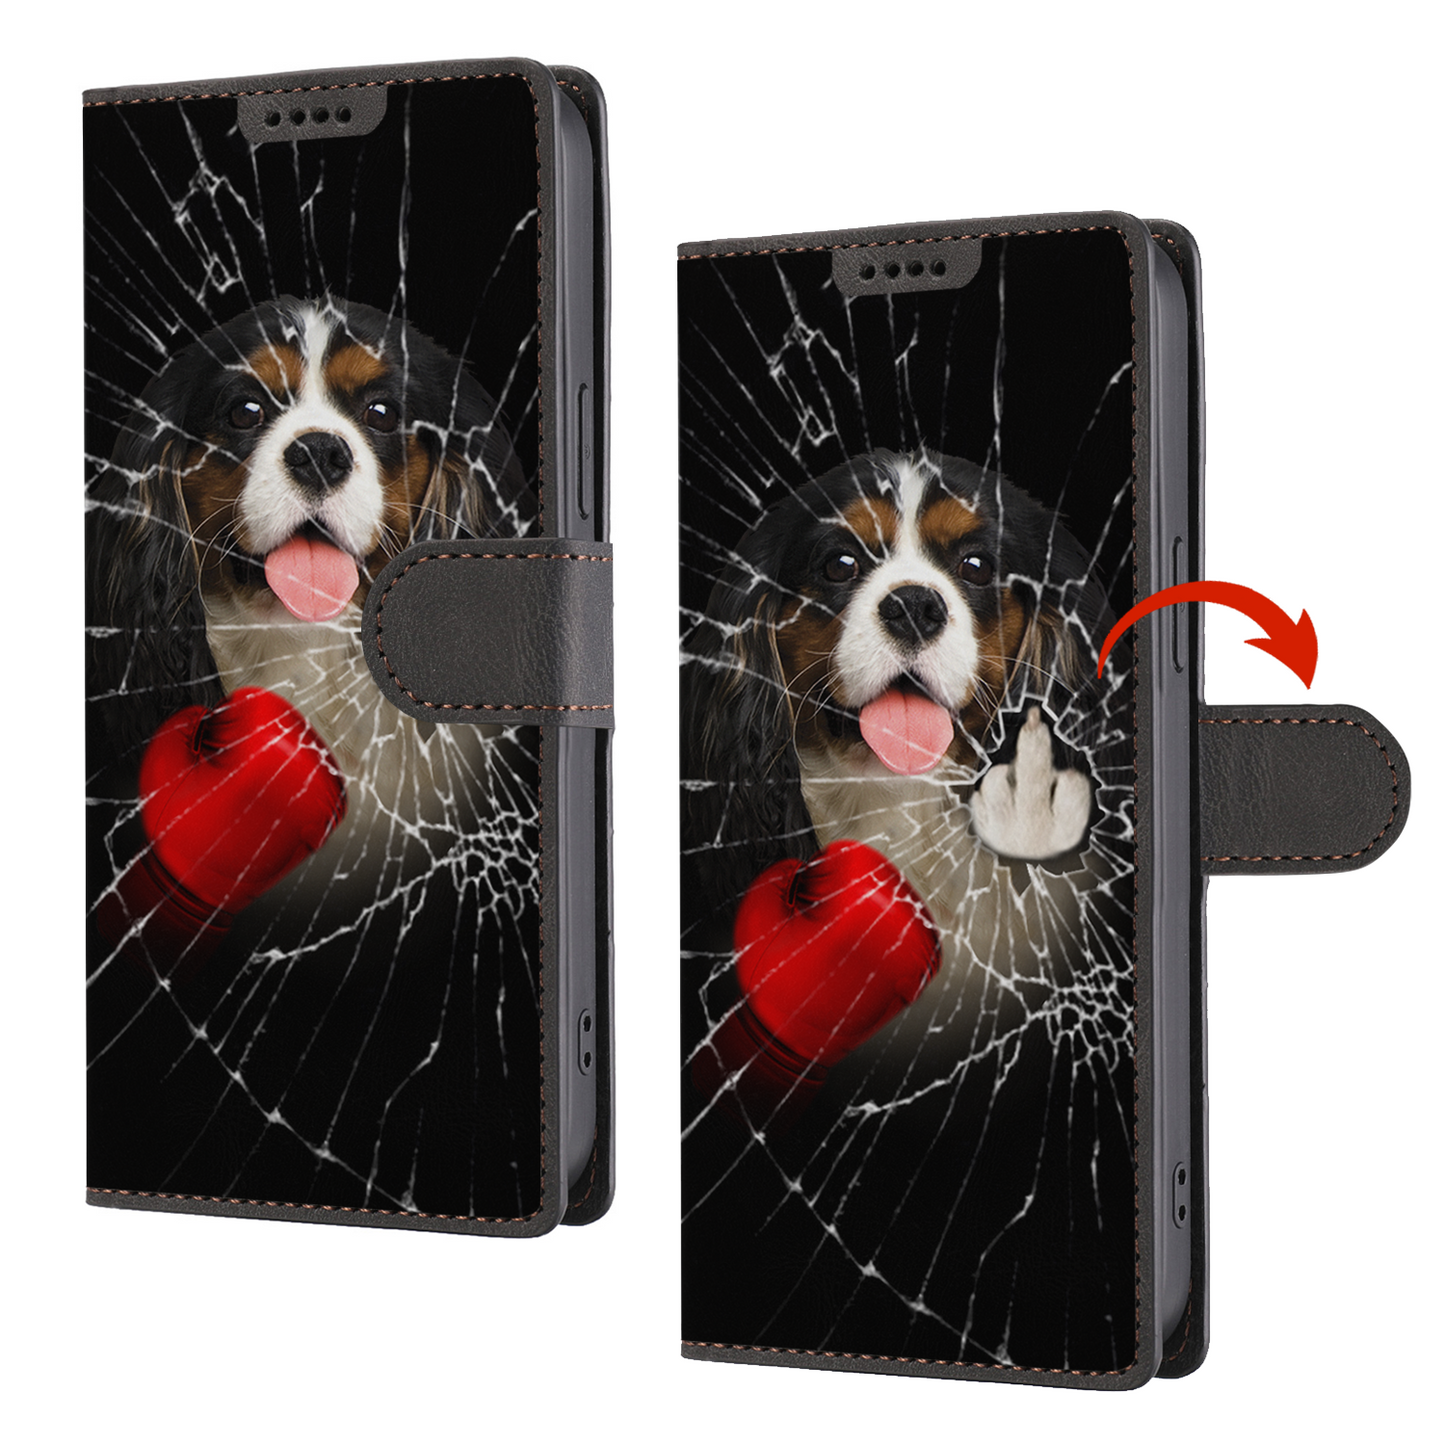 Knock You Out, Cavalier King Charles Spaniel - Wallet Phone Case V1